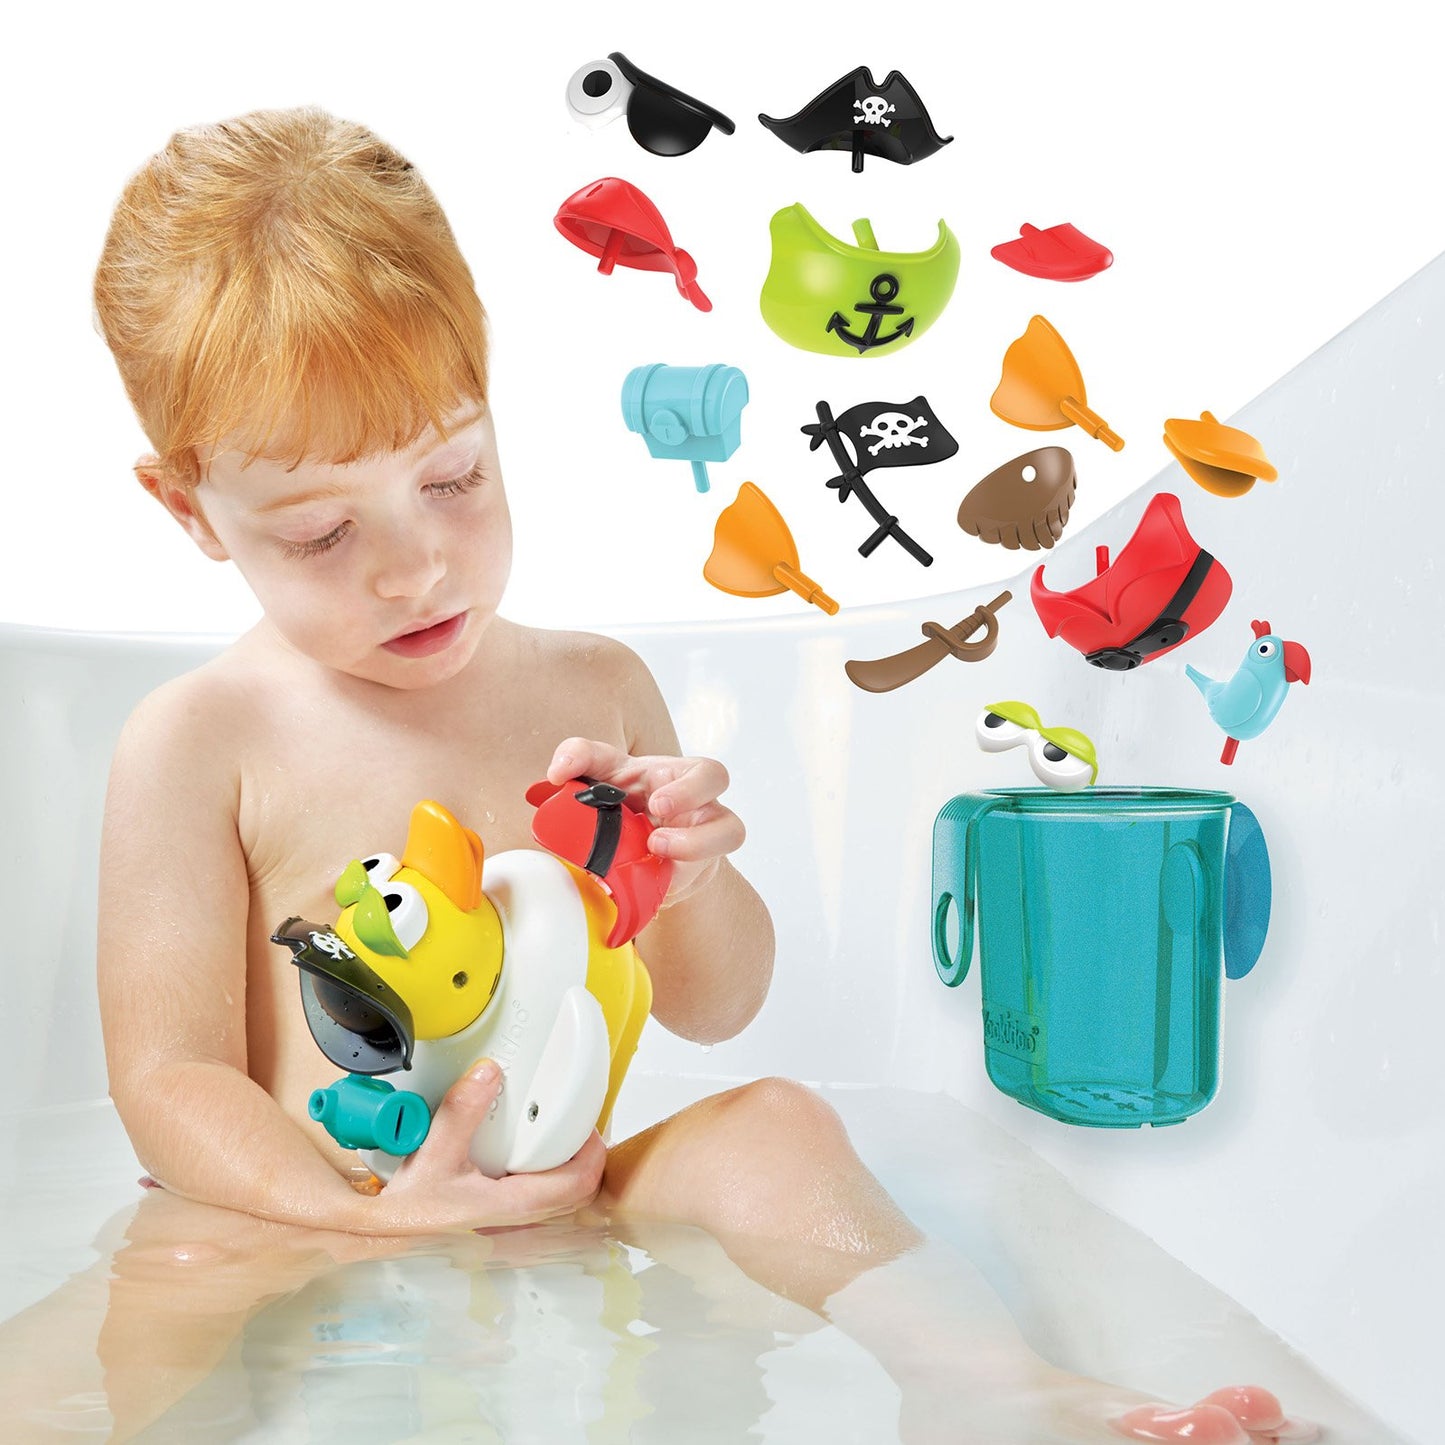 Yookidoo Bath Toy with Powered Water Cannon Shooter - Jet Duck Pirate